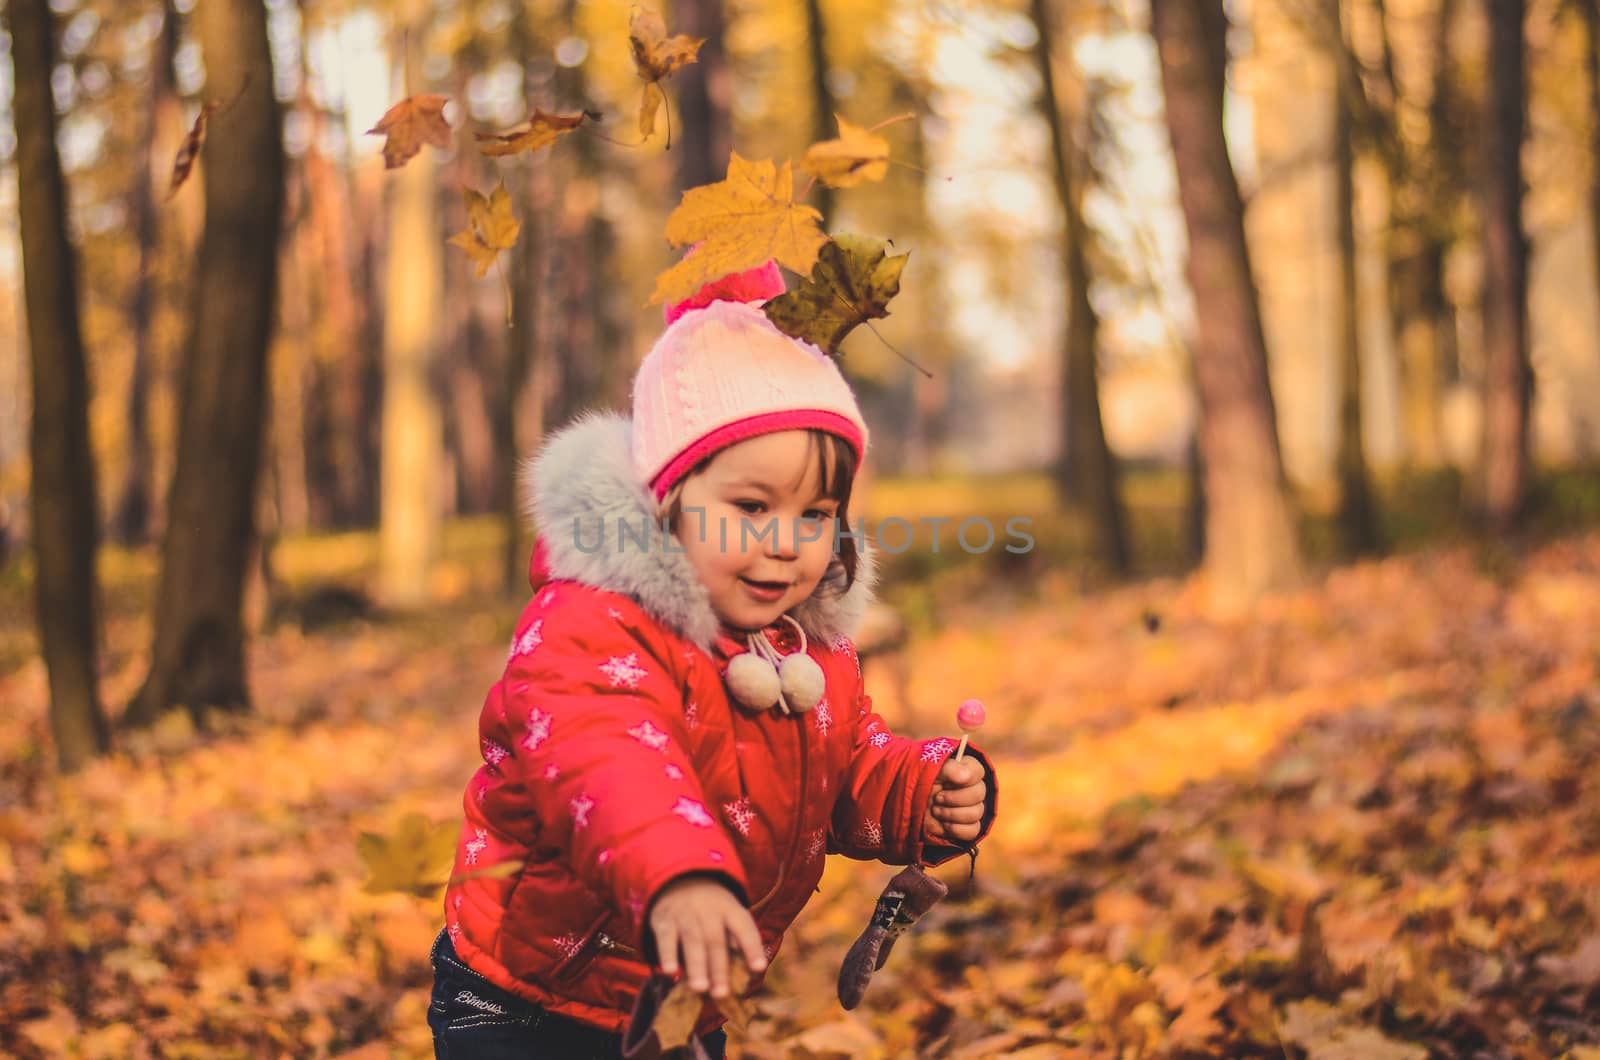 Pretty girl playing with yellow leaves in the autumn forest